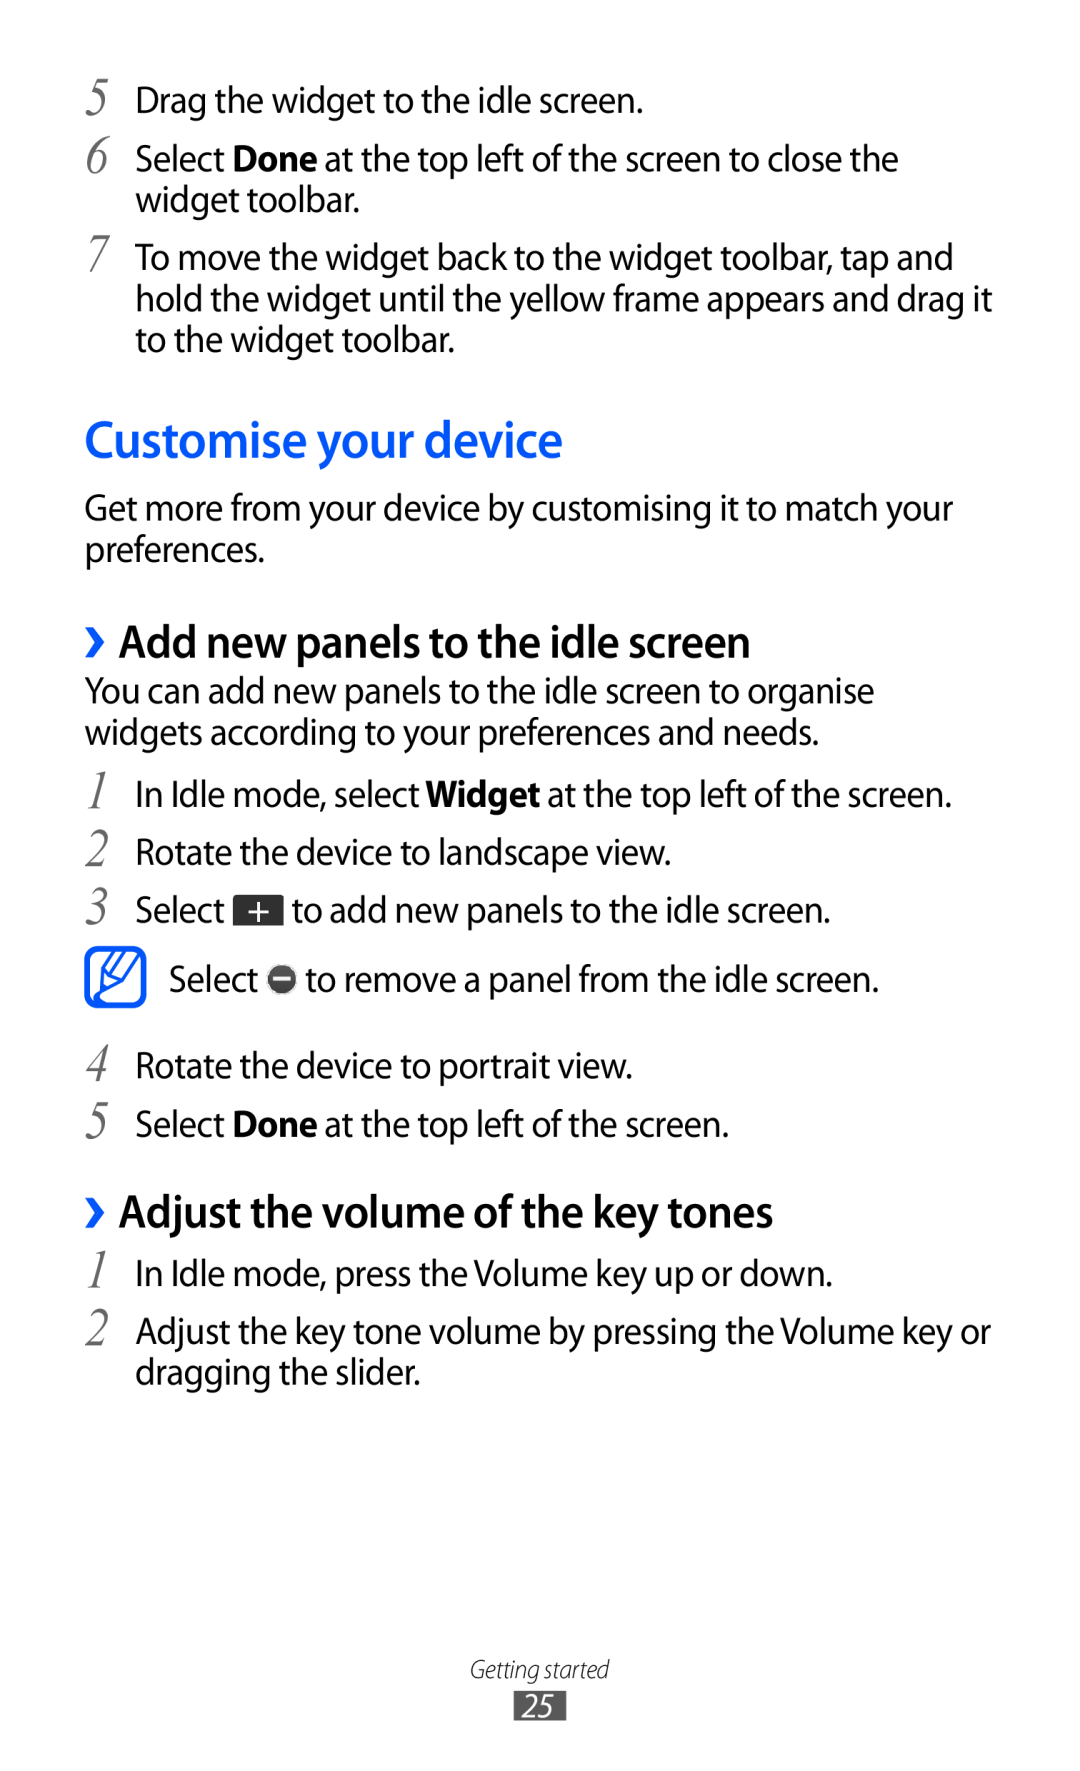 Samsung GT-C6712LKAXEZ Customise your device, ››Add new panels to the idle screen, ››Adjust the volume of the key tones 